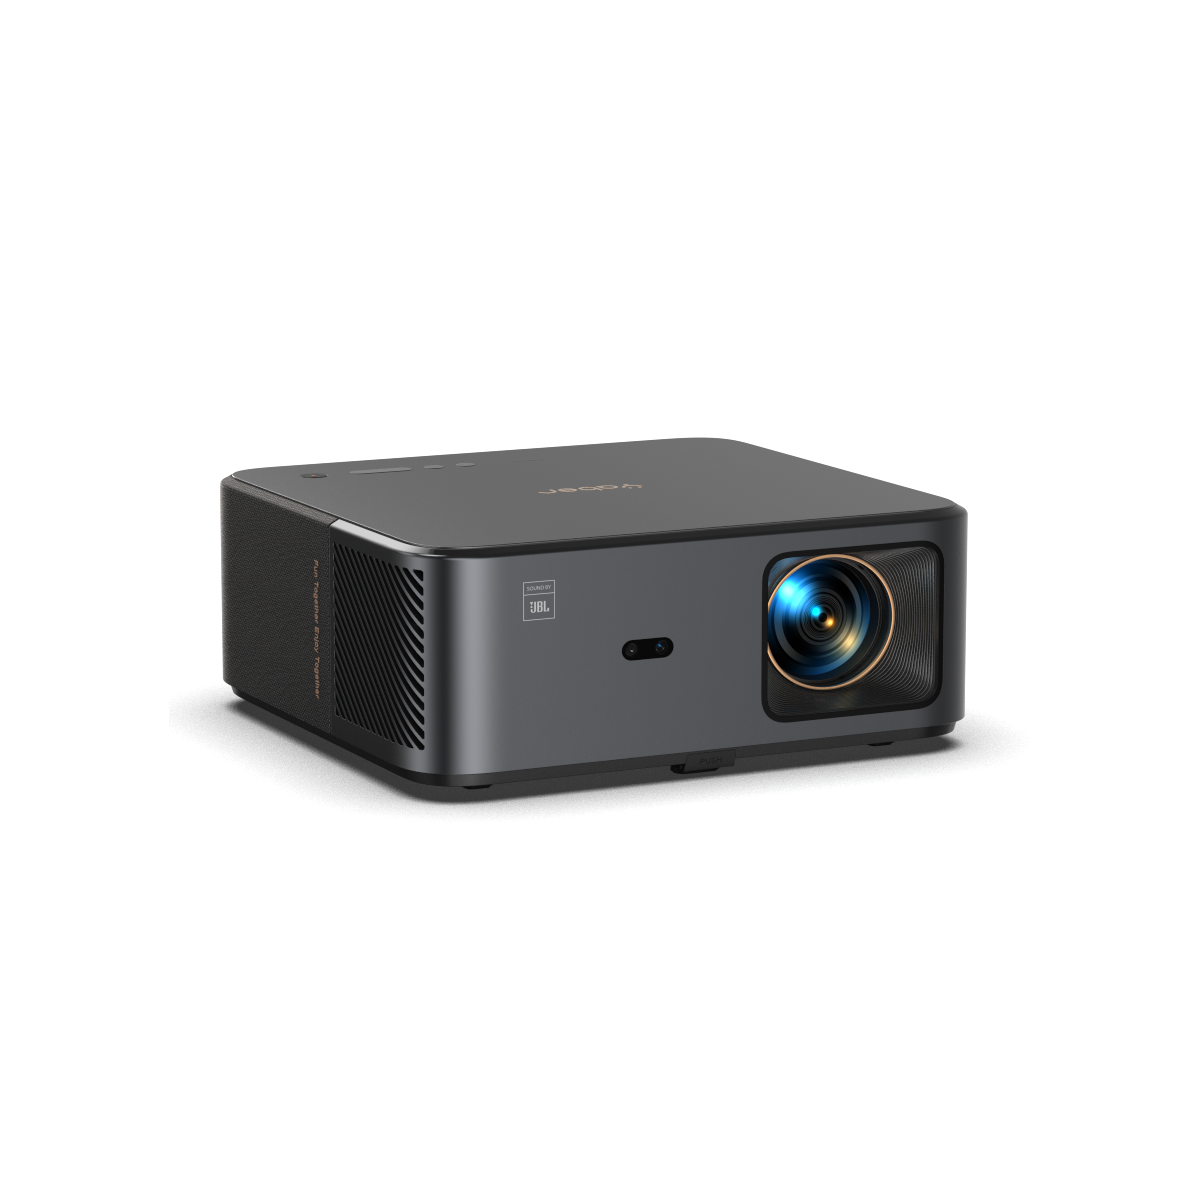 YABER PROJECTOR K2s - YABER Entertainment Projector